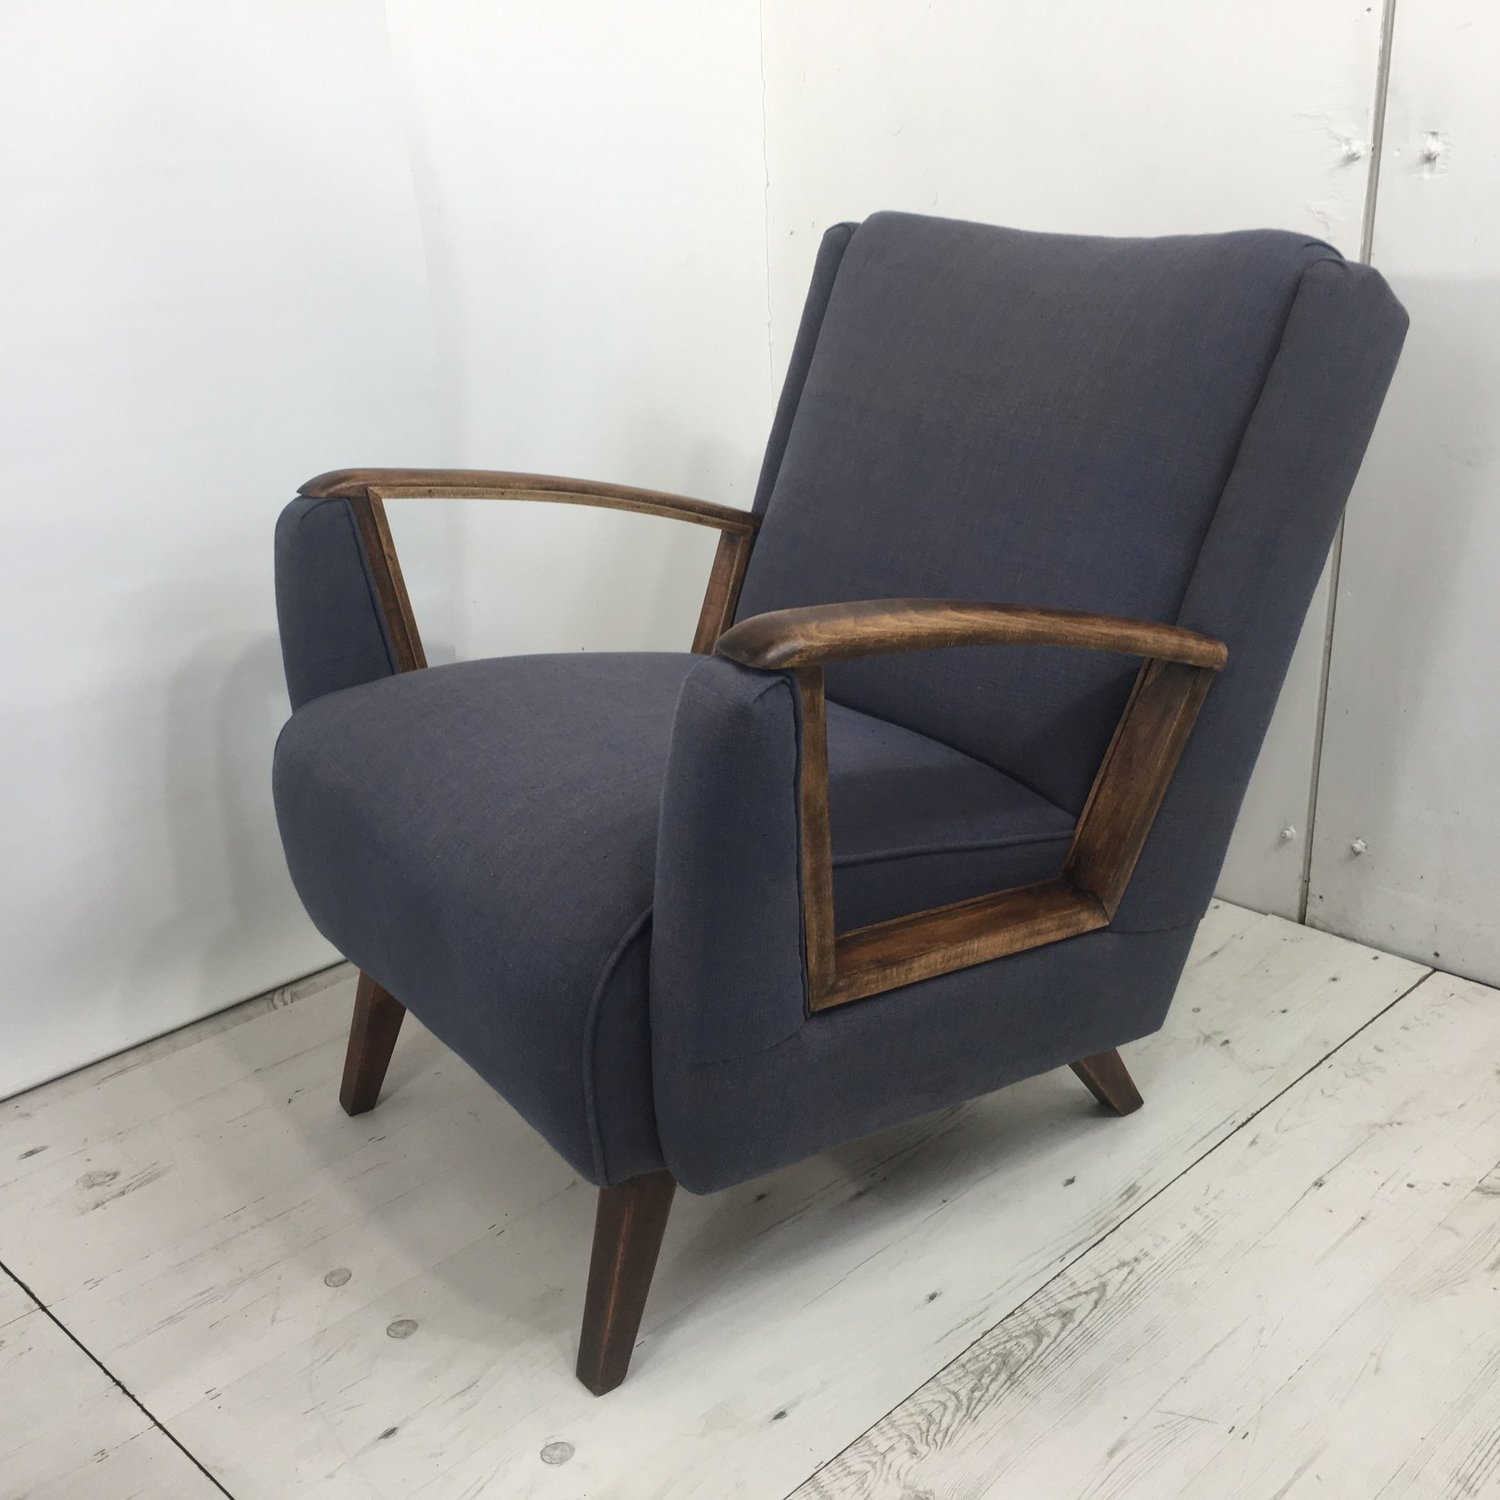 Sold East German 1950s Classic Armchair